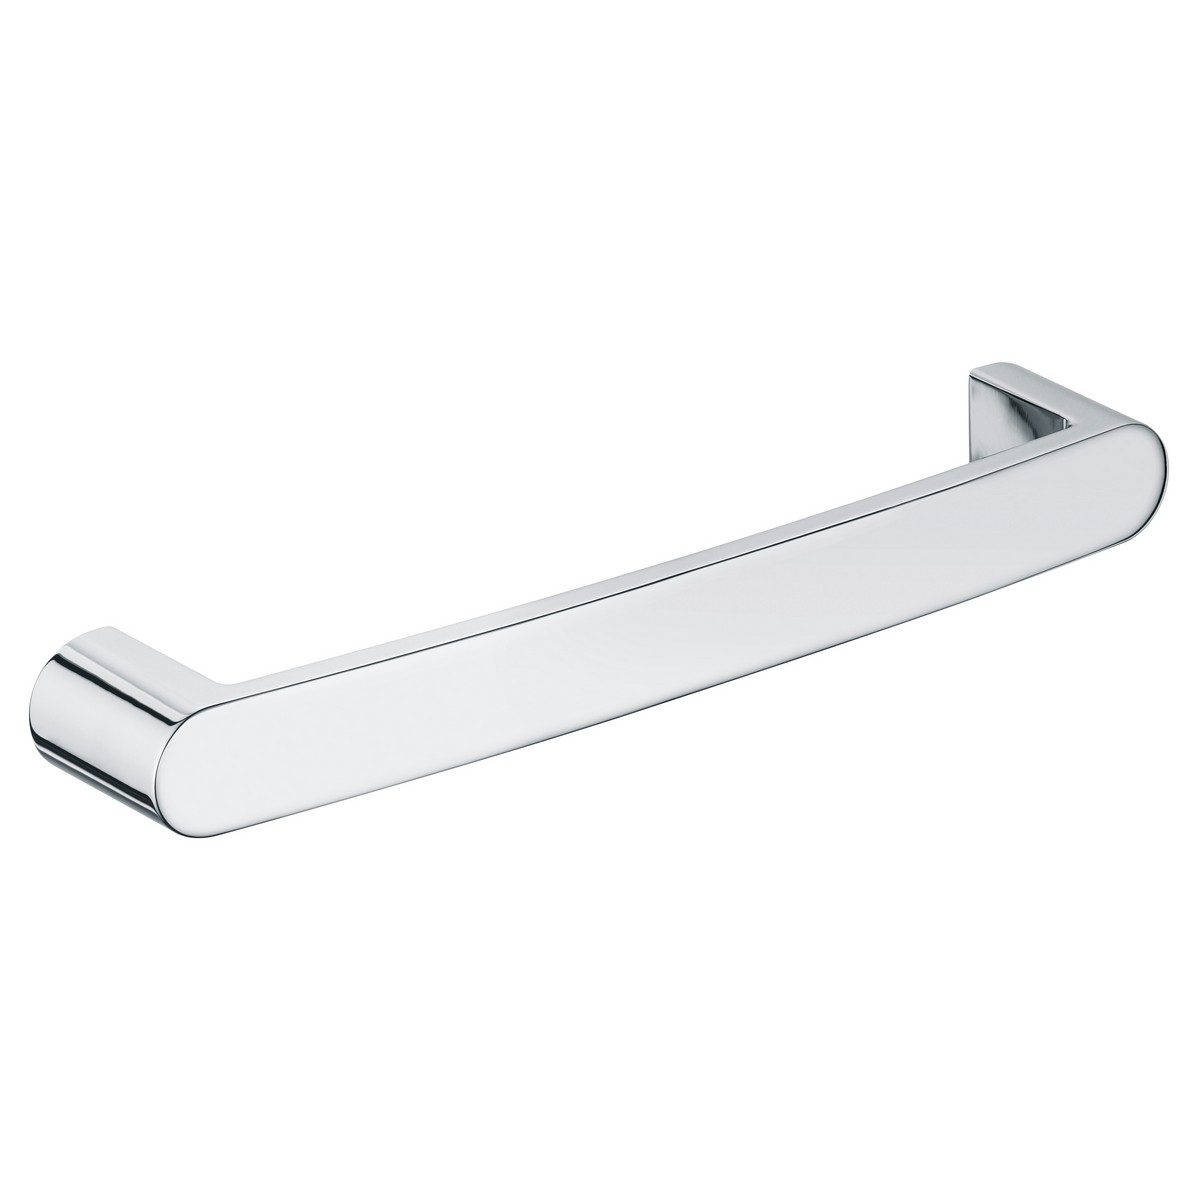 KEUCO 11607010000 ELEGANCE 13 1/4 INCH WALL MOUNTED SUPPORT RAIL IN POLISHED CHROME